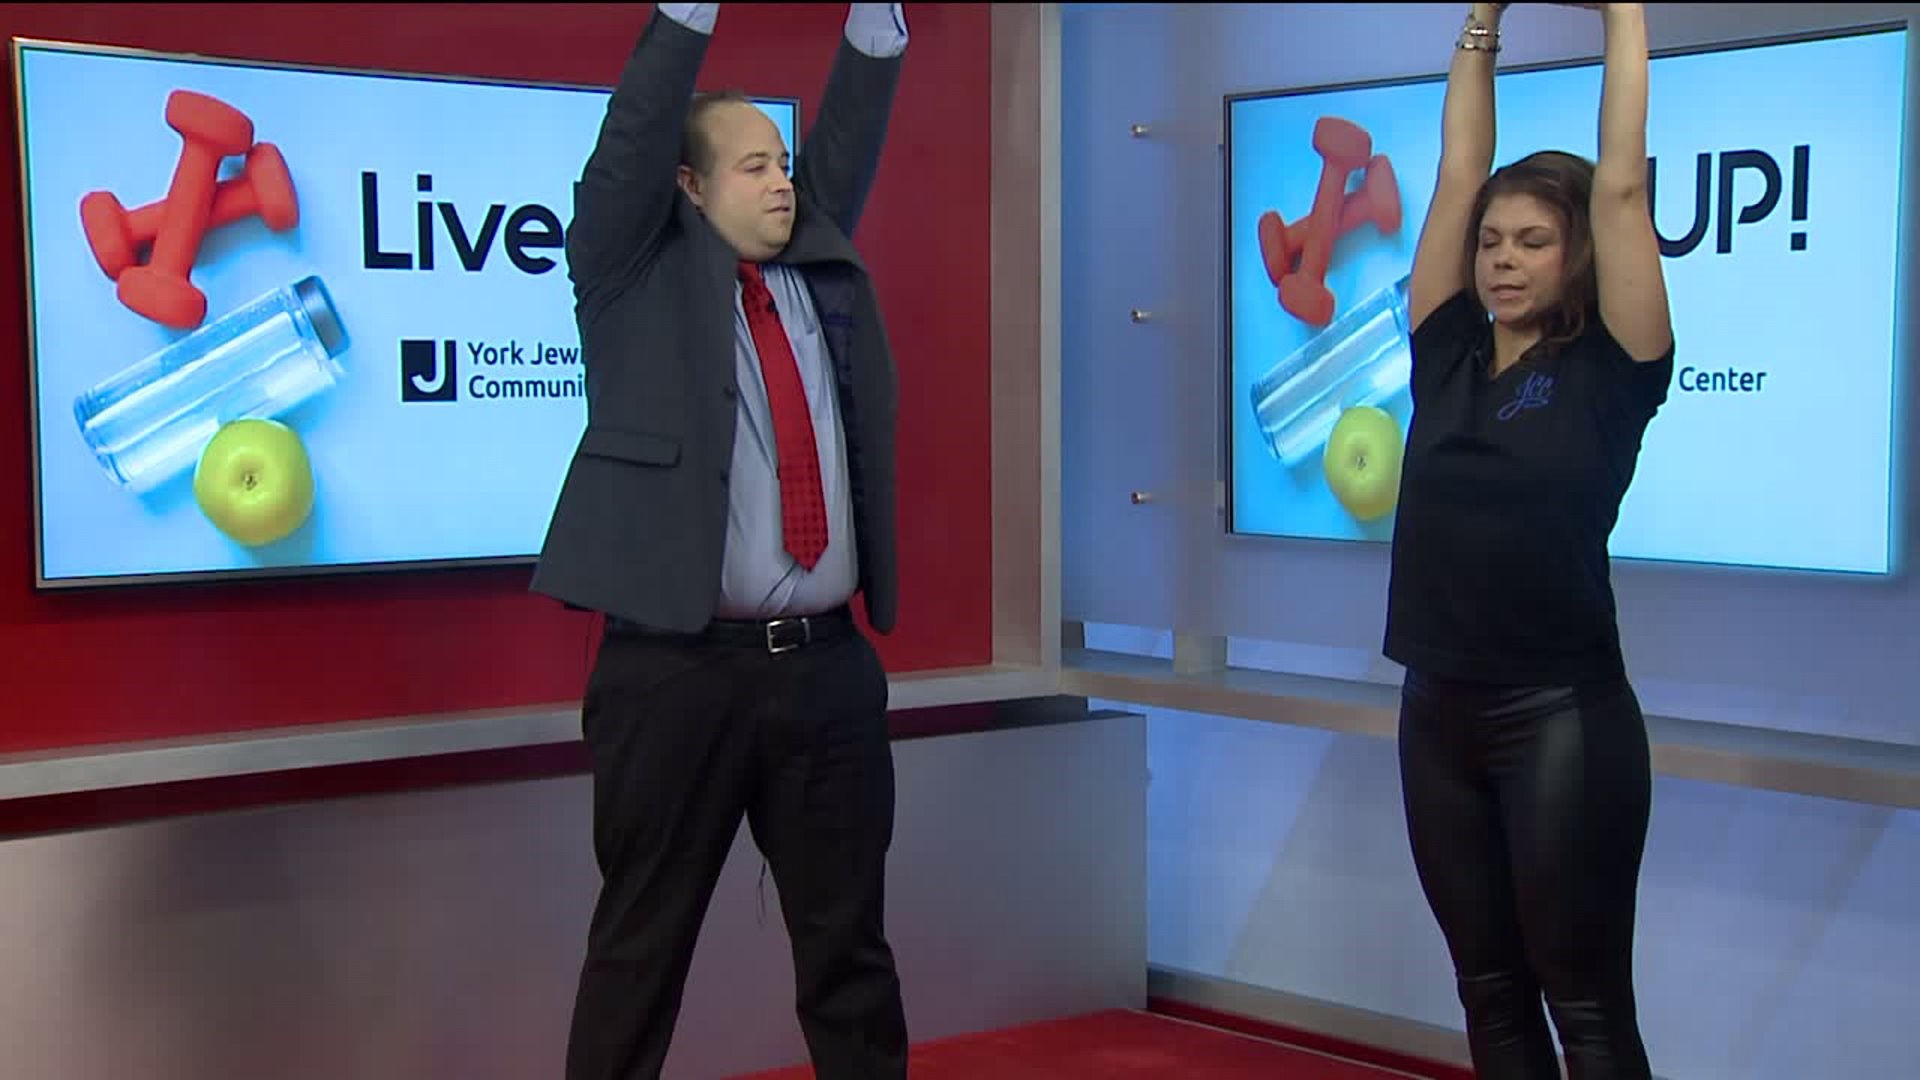 Live UP!: Five easy exercises to help improve posture